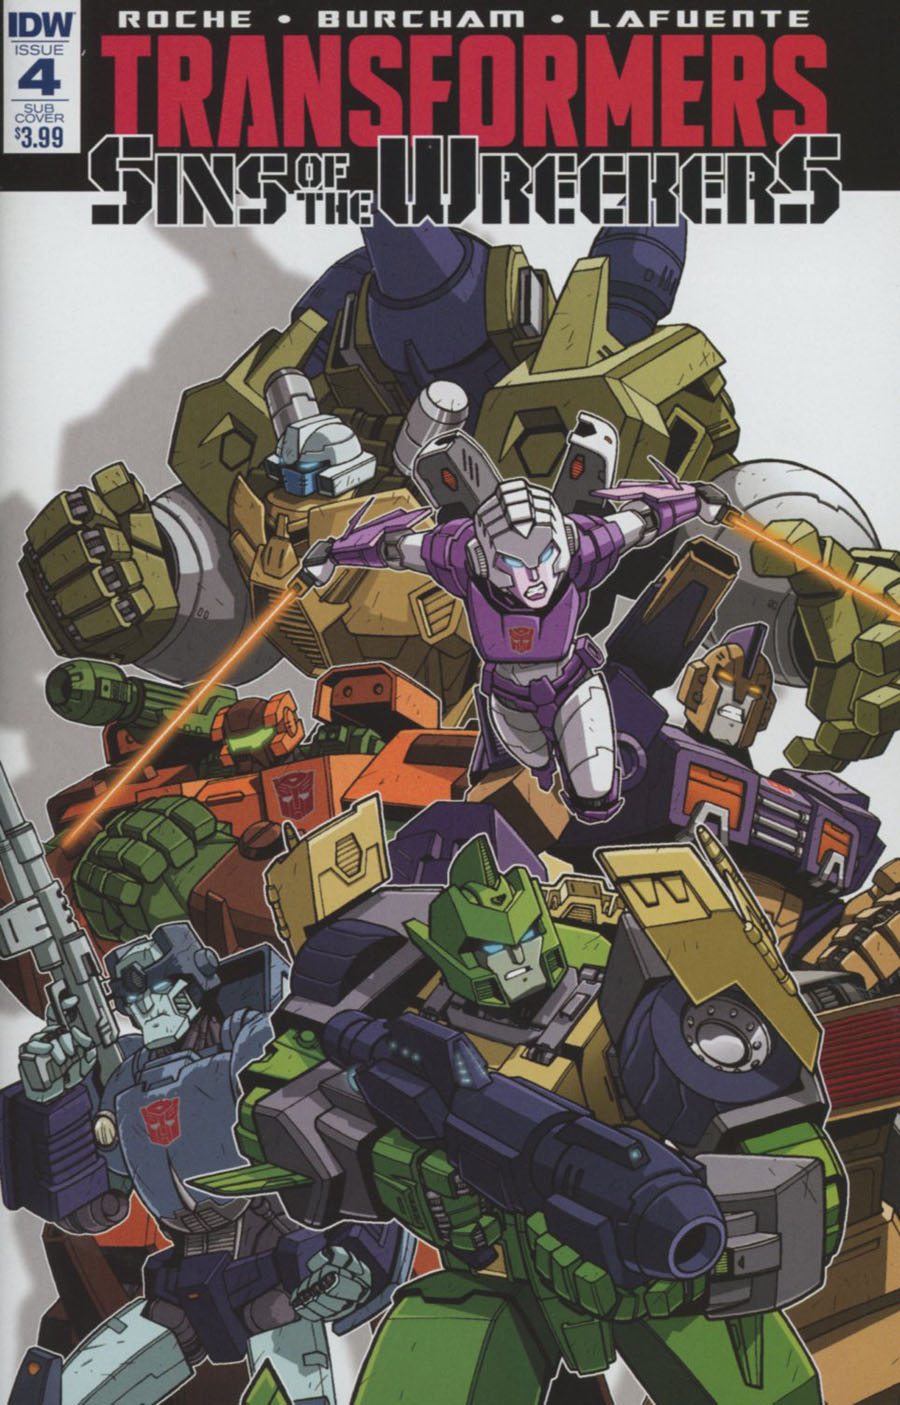 Transformers Sins Of The Wreckers #4 Cover B Variant Jack Lawrence Subscription Cover